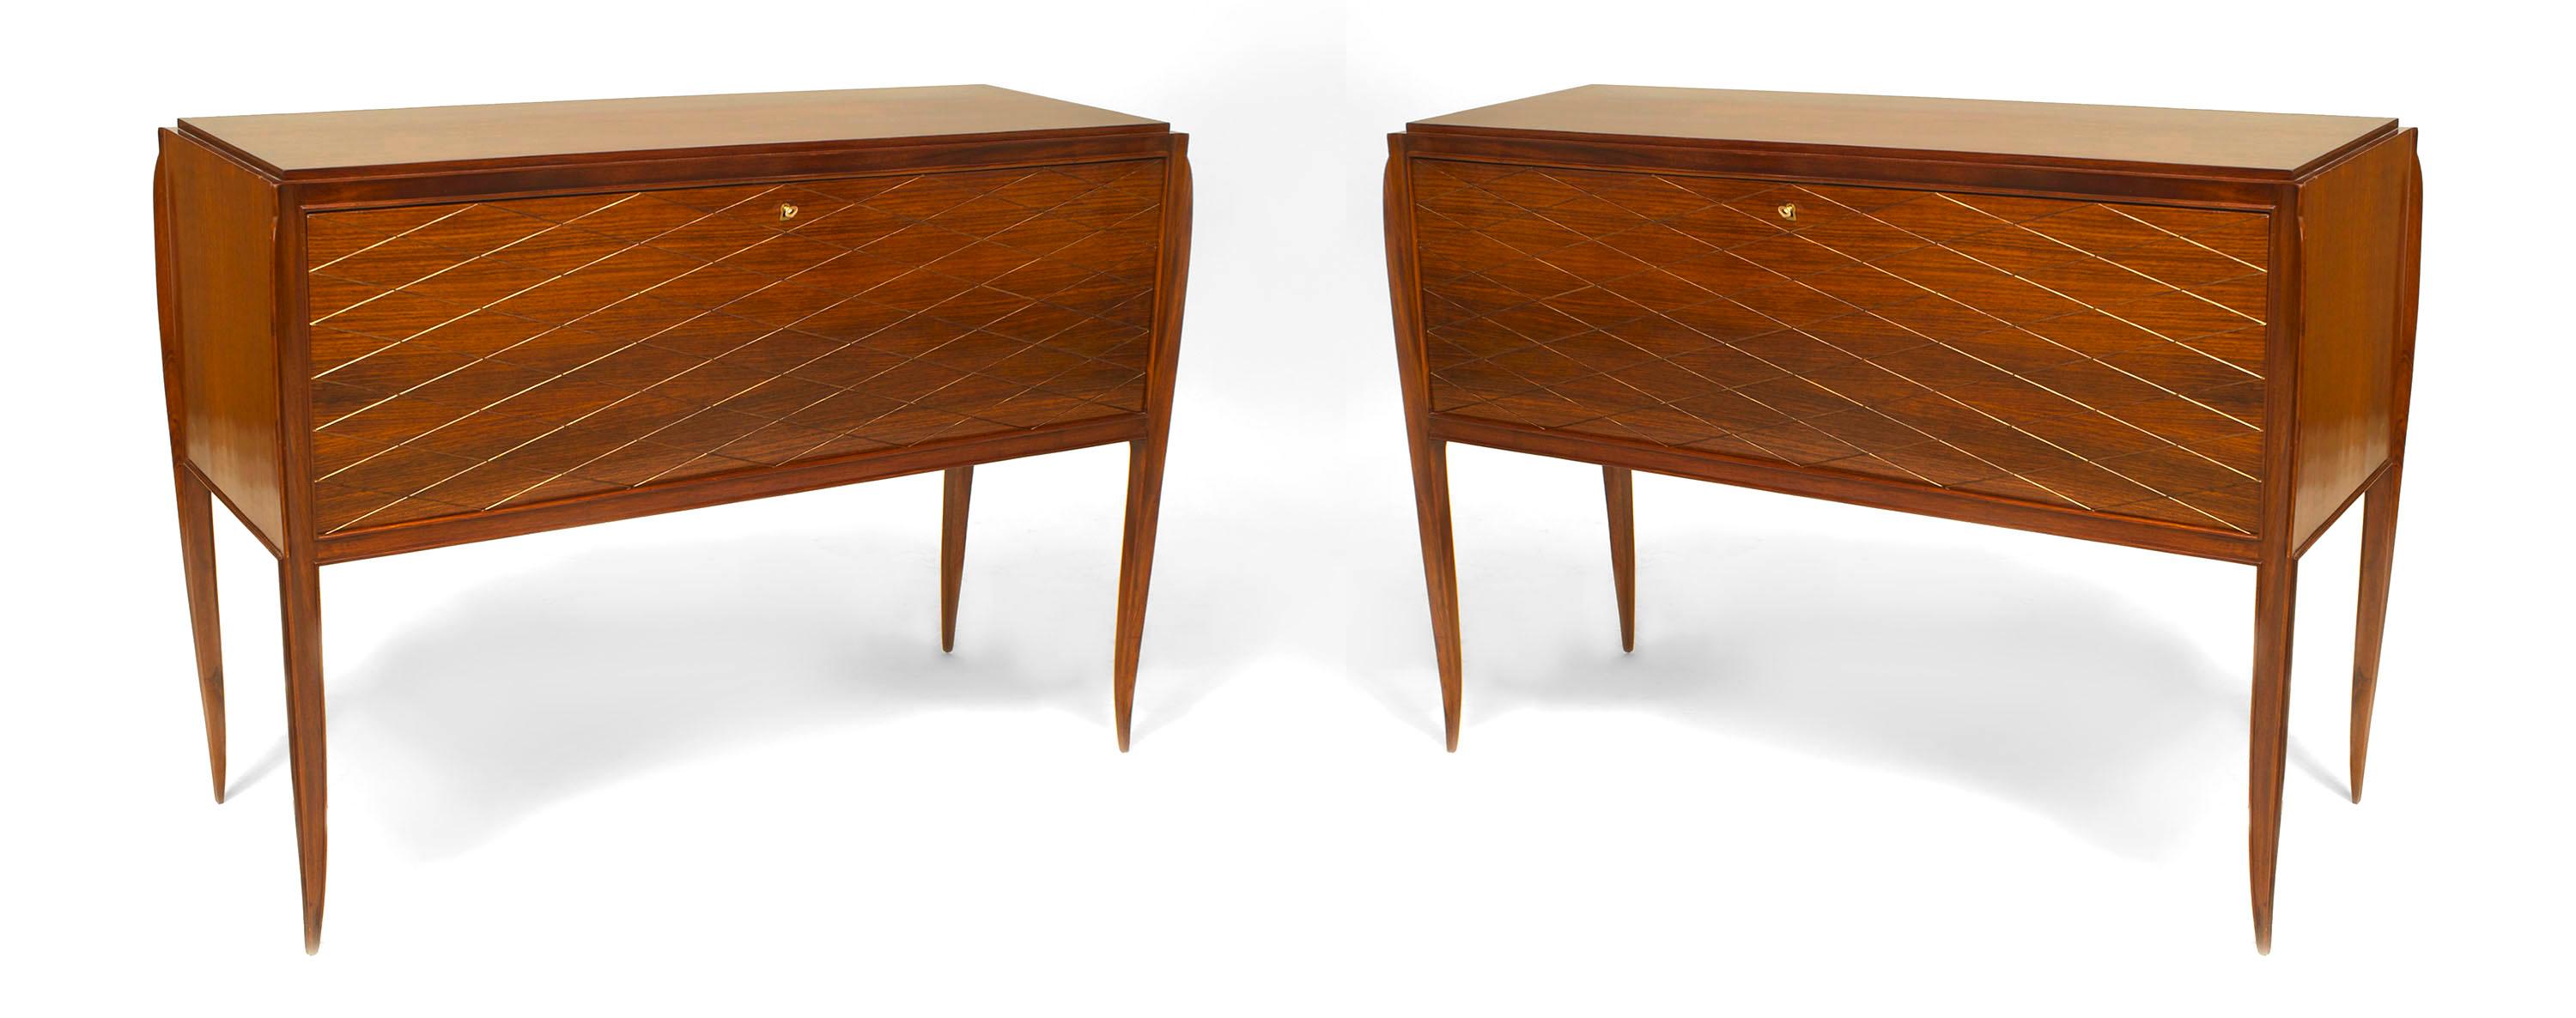 Pair of 1940's French commodes by Jean Pascaud. The commodes are composed of rosewood etched with a diamond pattern and fitted with a drop front door and sycamore and mirror lined interior.